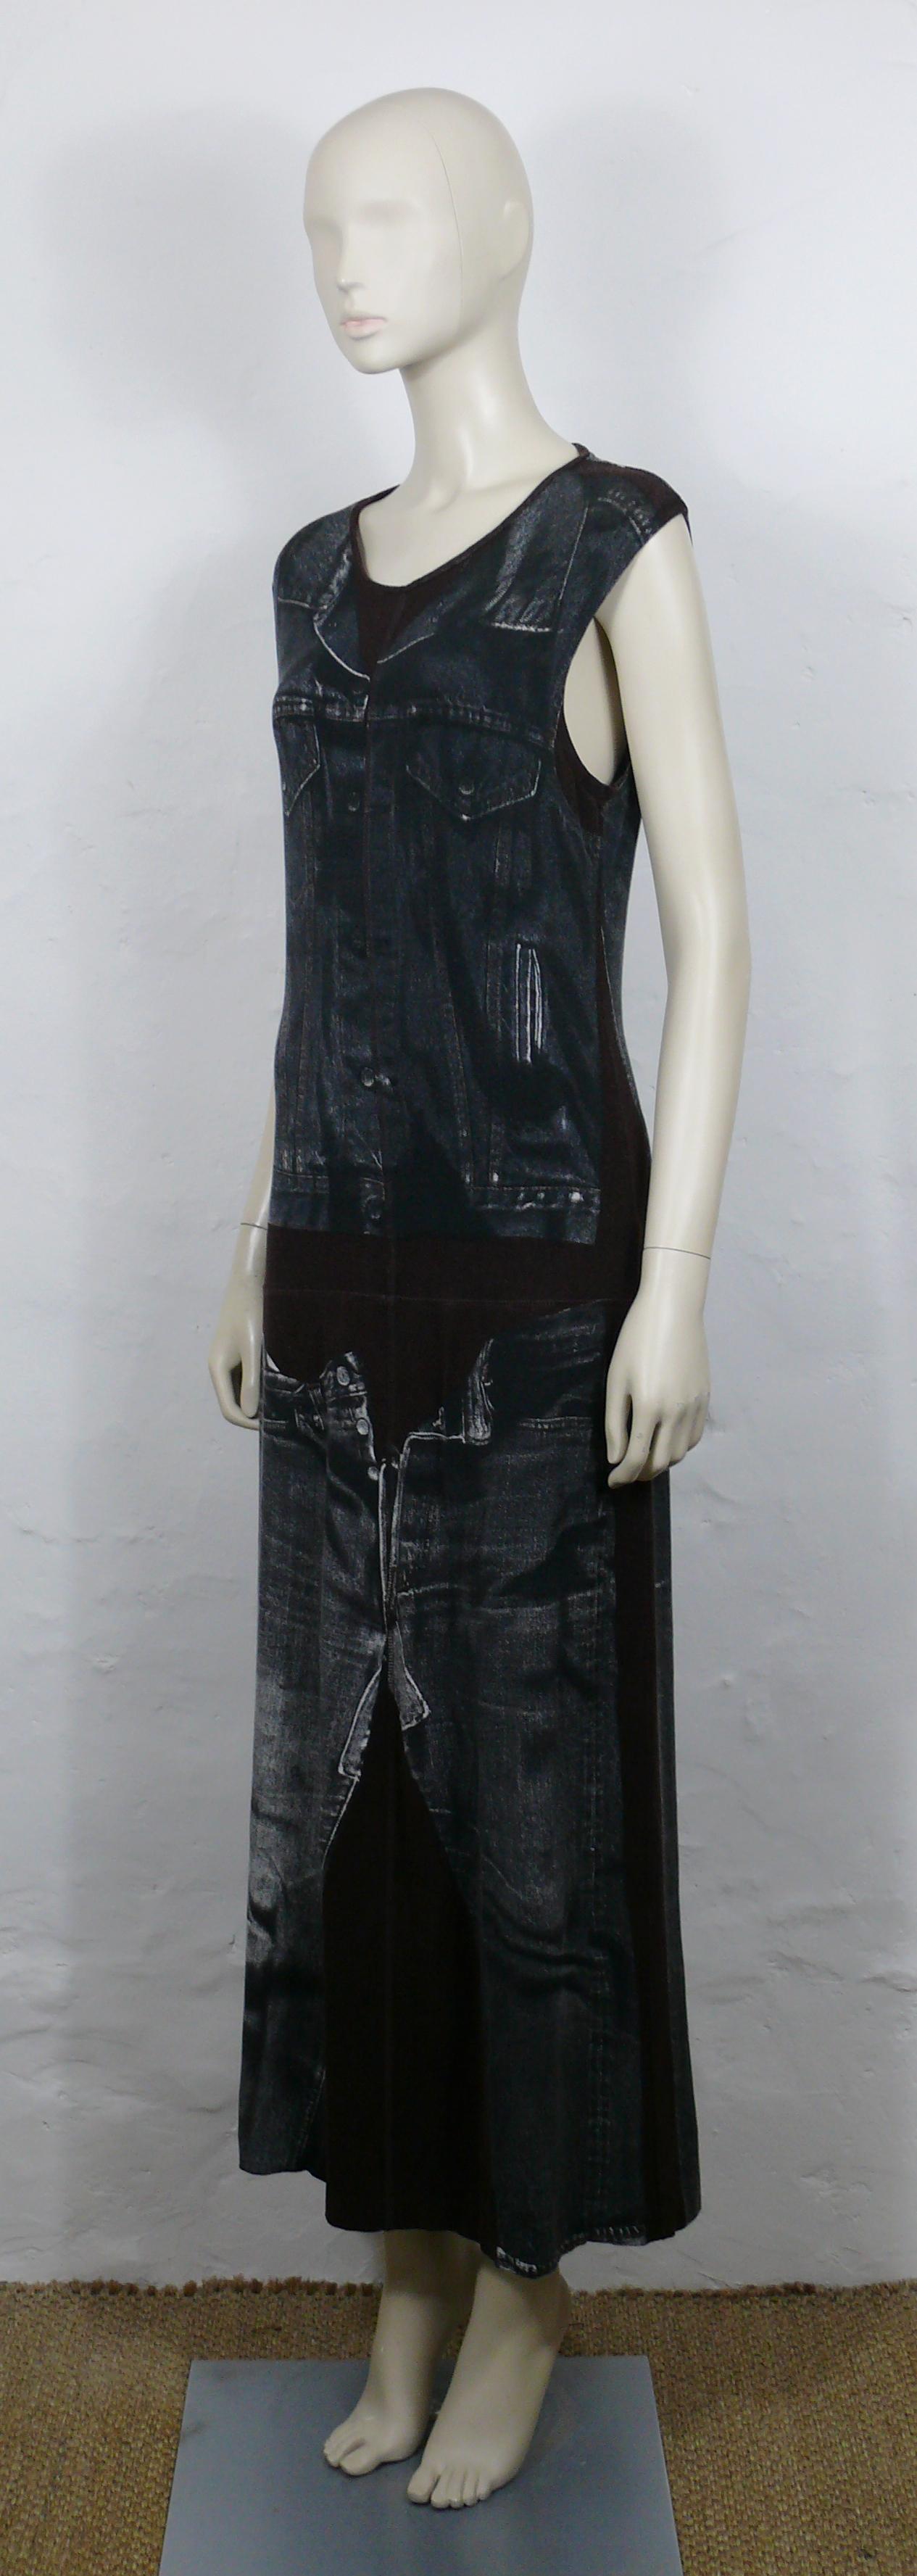 JEAN PAUL GAULTIER Vintage Sleevless Trompe L'oeil Maxi Dress In Good Condition For Sale In Nice, FR